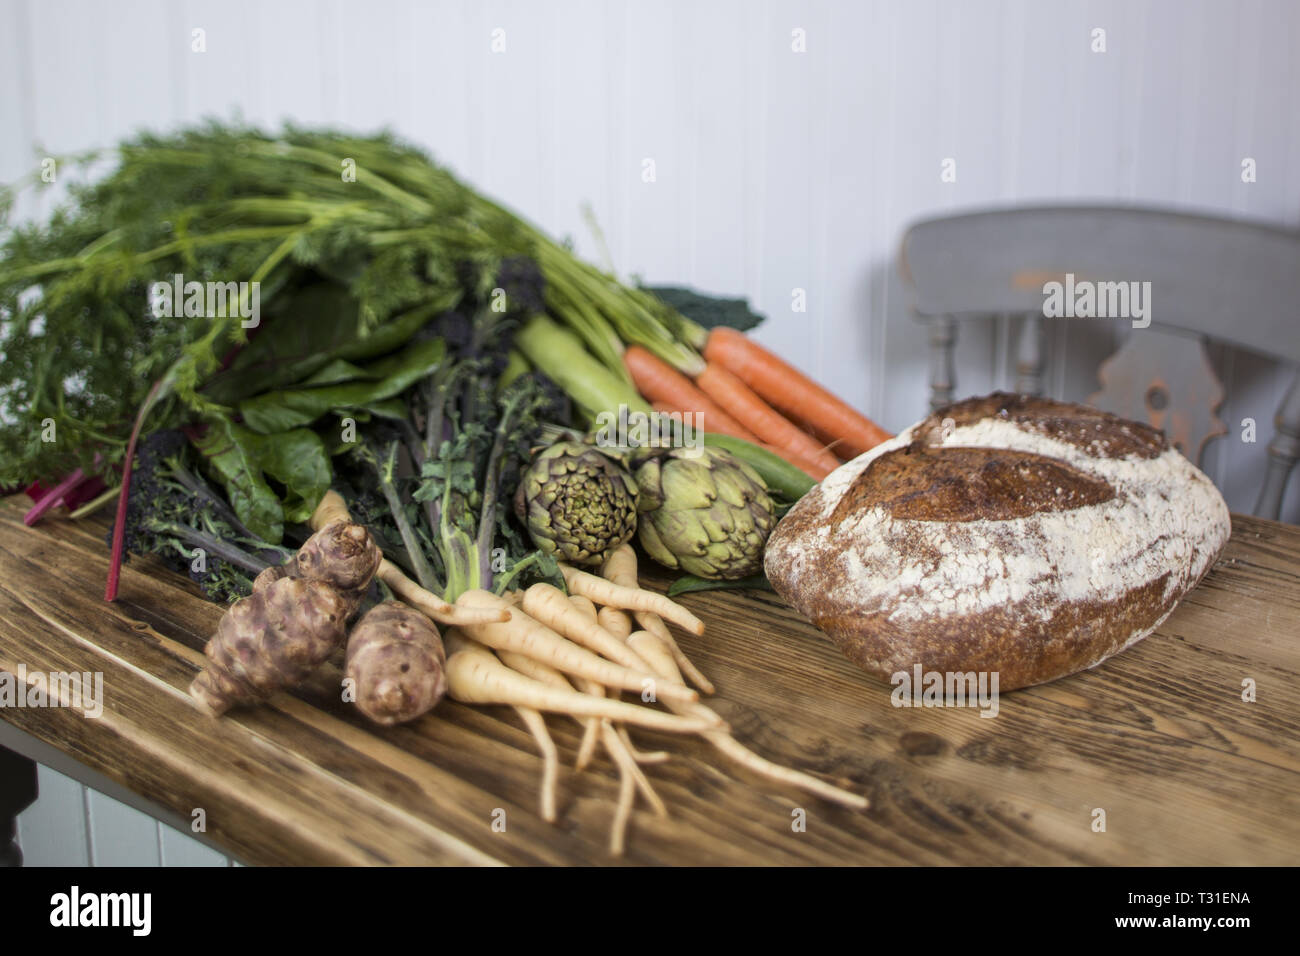 fresh produce on a wooden table with a loaf of sourdough bread Stock Photo